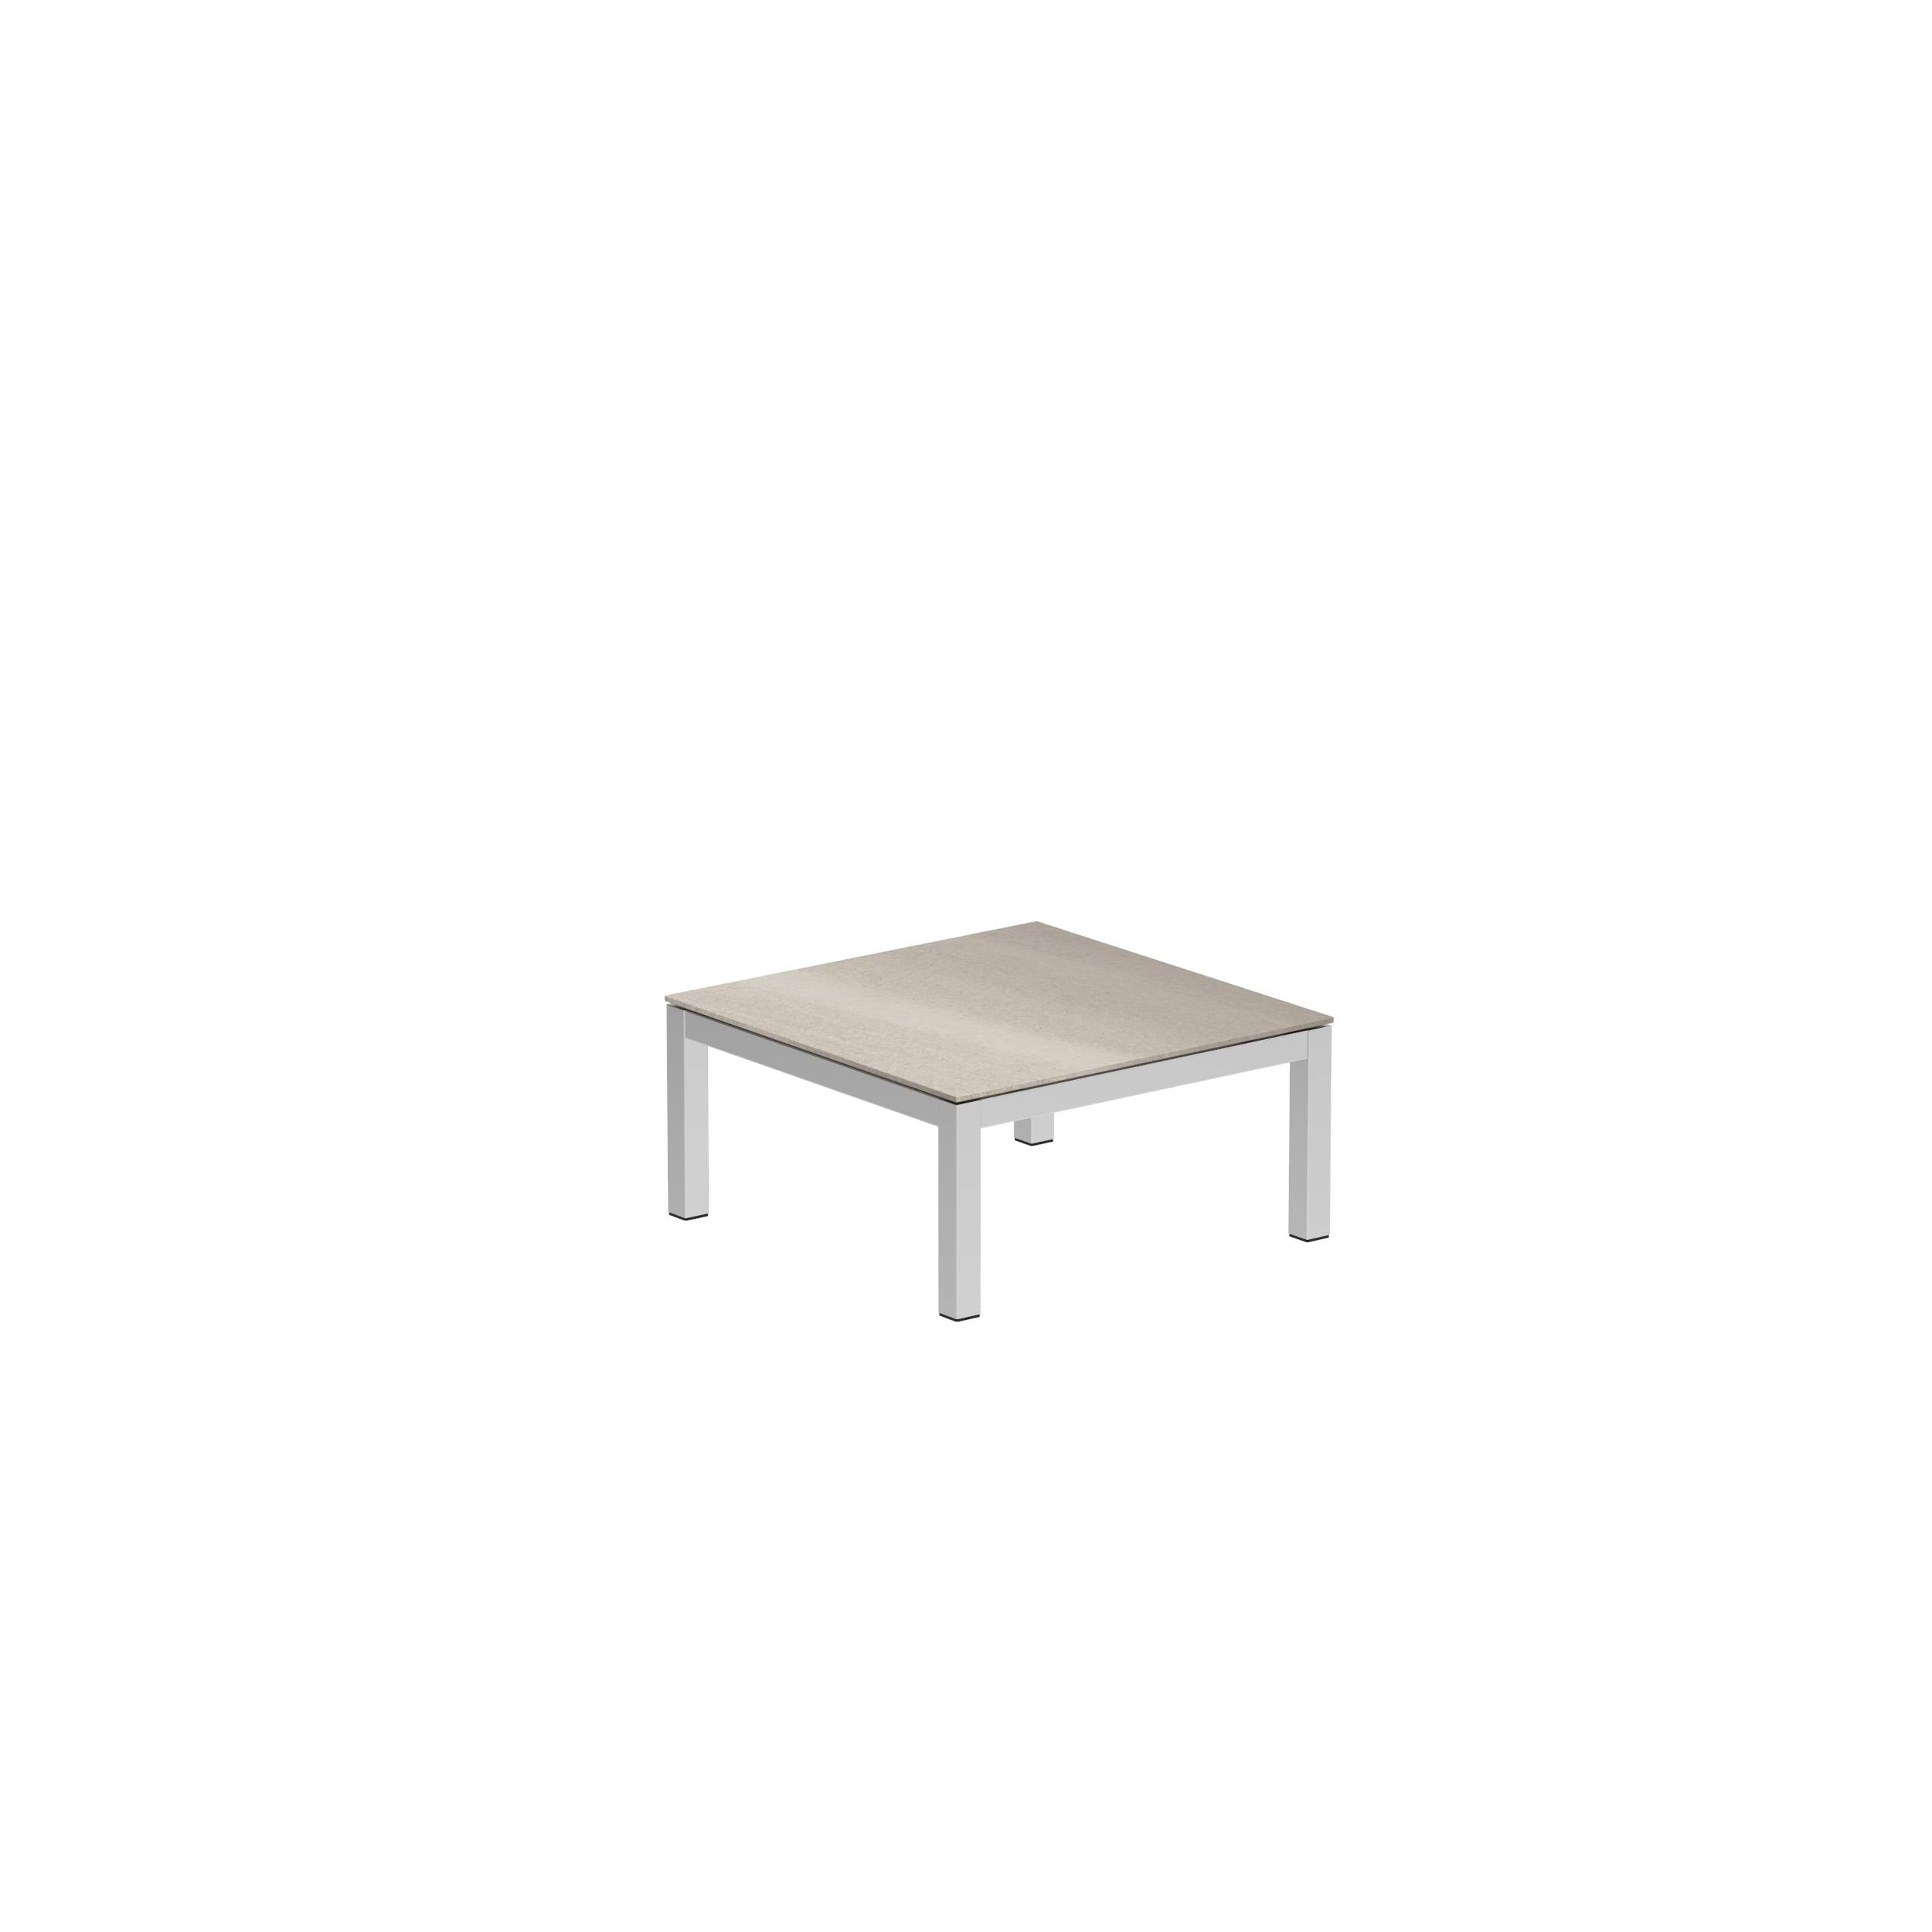 Taboela Low Table 80x80cm Ep + Ceramic Top Taupe Grey